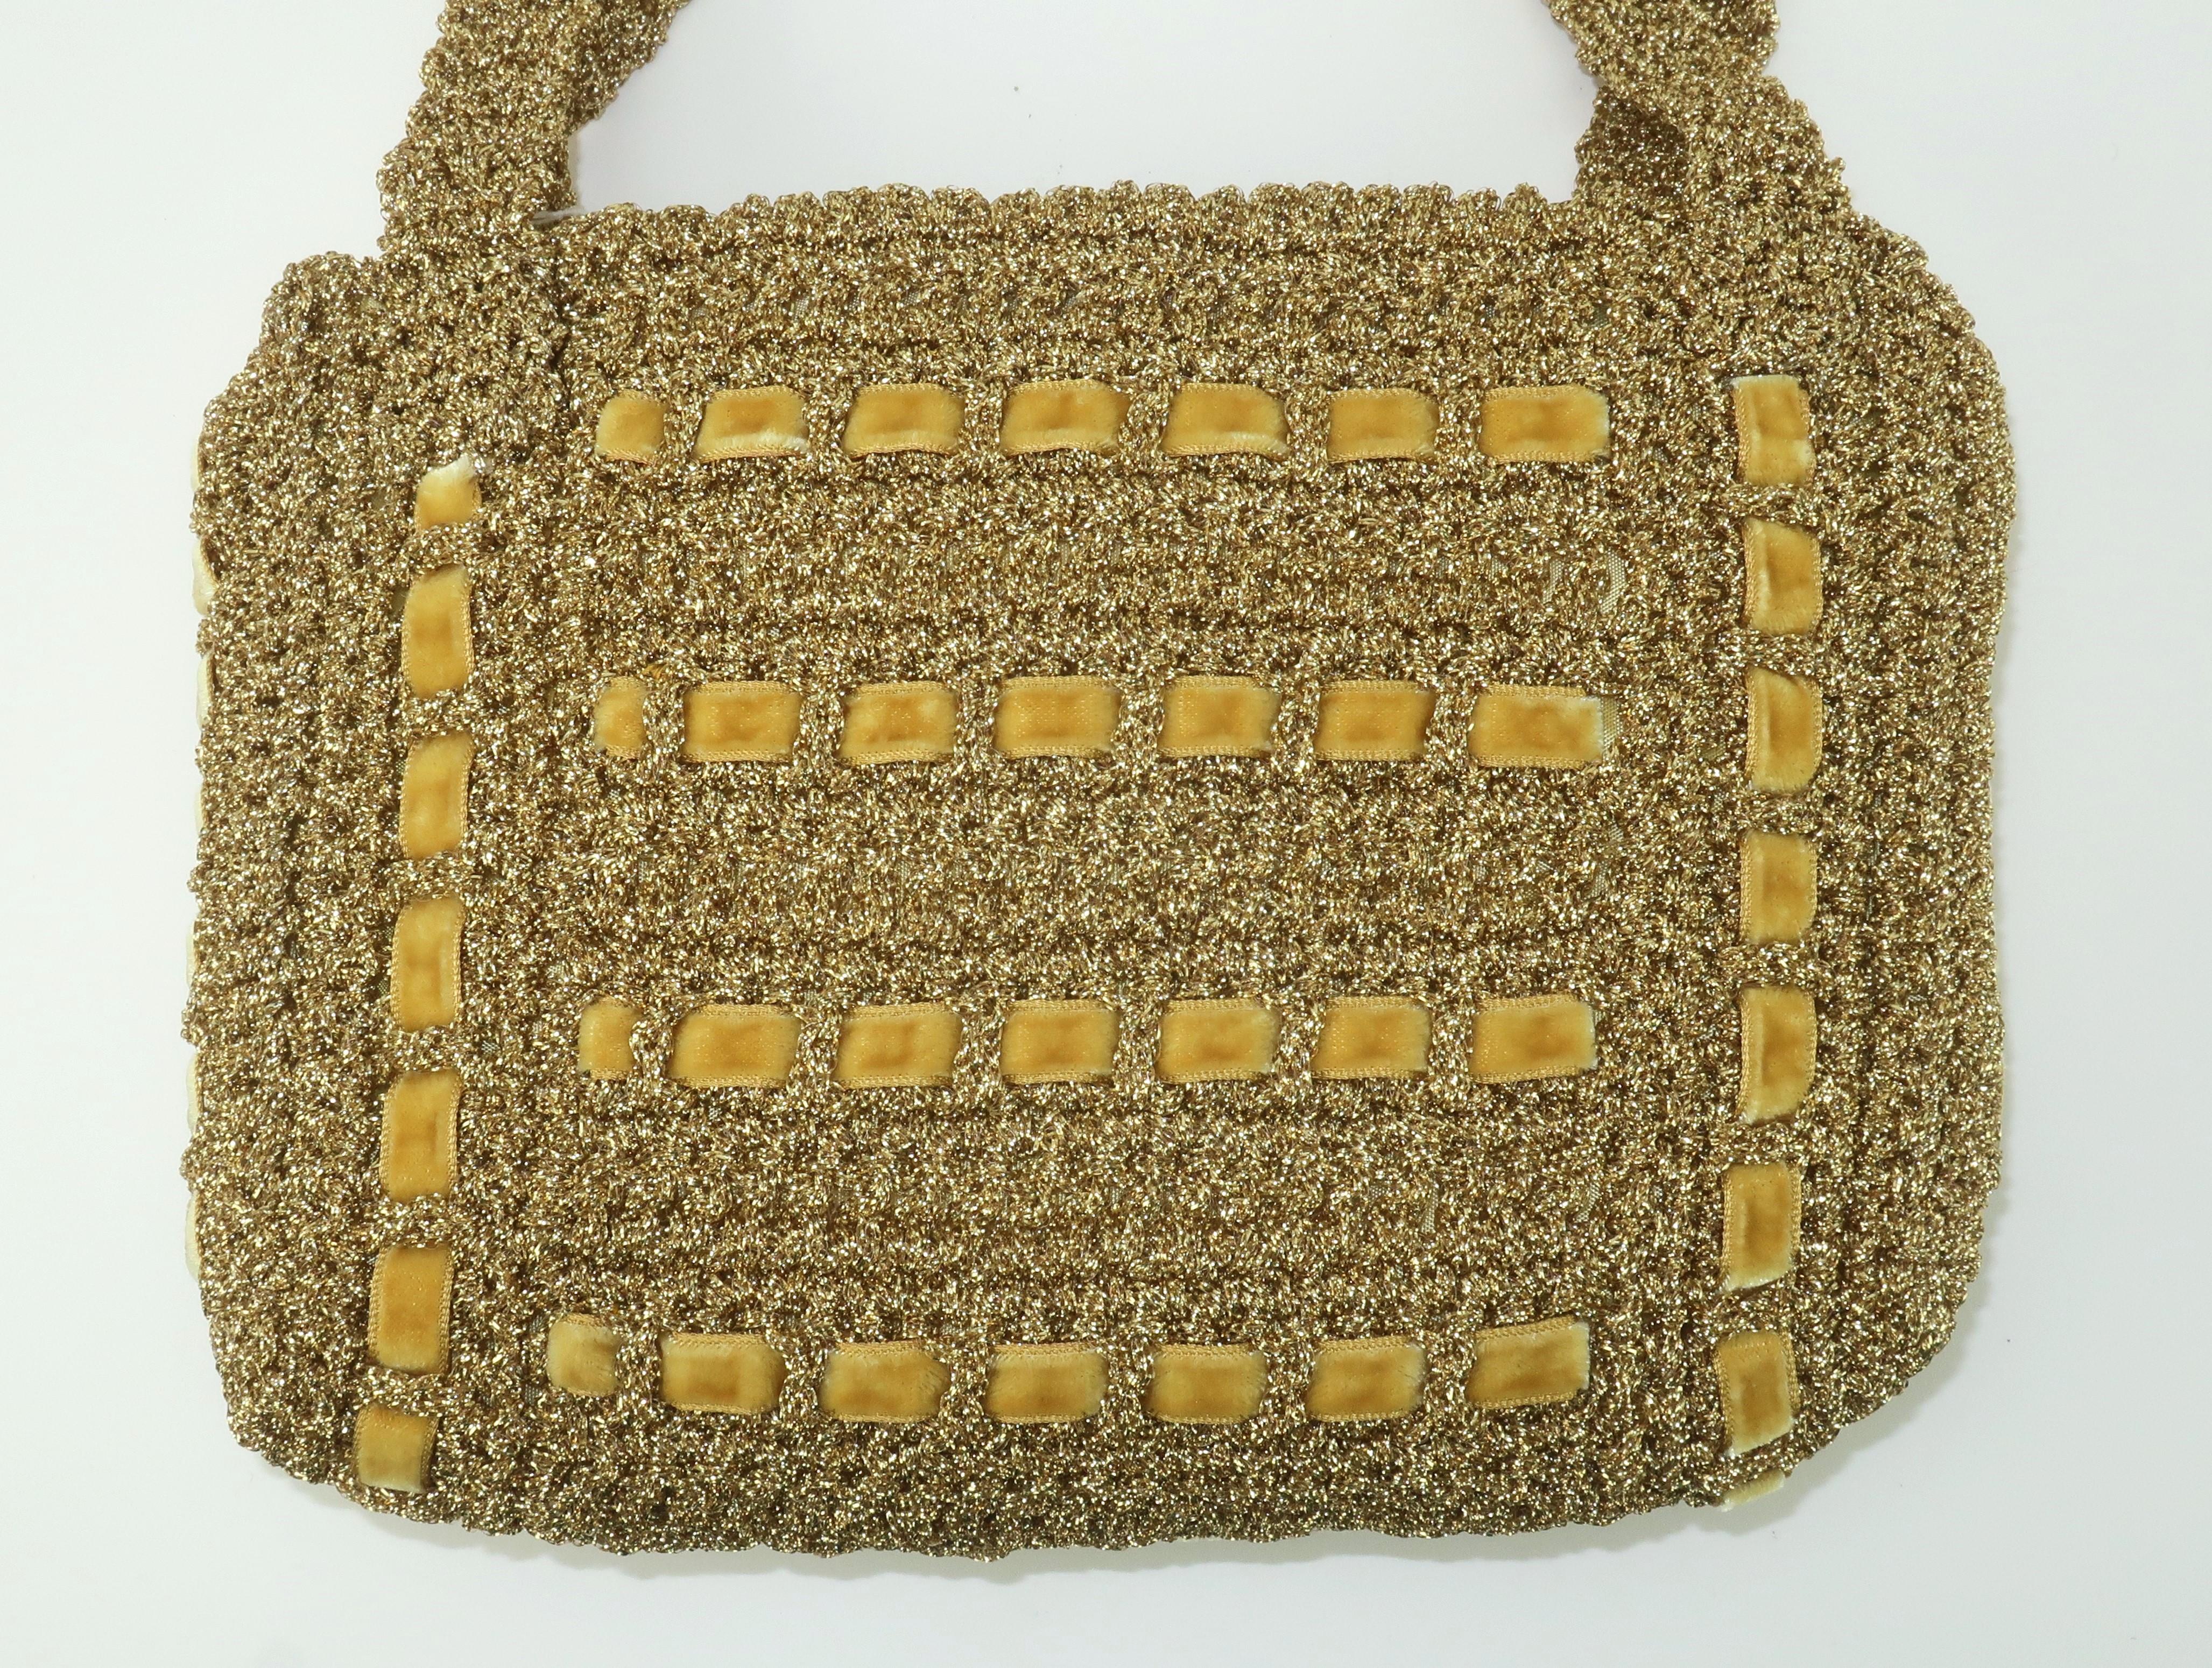 Boho meets mod in this fun 1960's gold crochet handbag made in Italy for Walborg.  Hilde Walborg founded her company in the 1940's and produced classically styled handbags that offered a little something different for a special occasion.  This bag